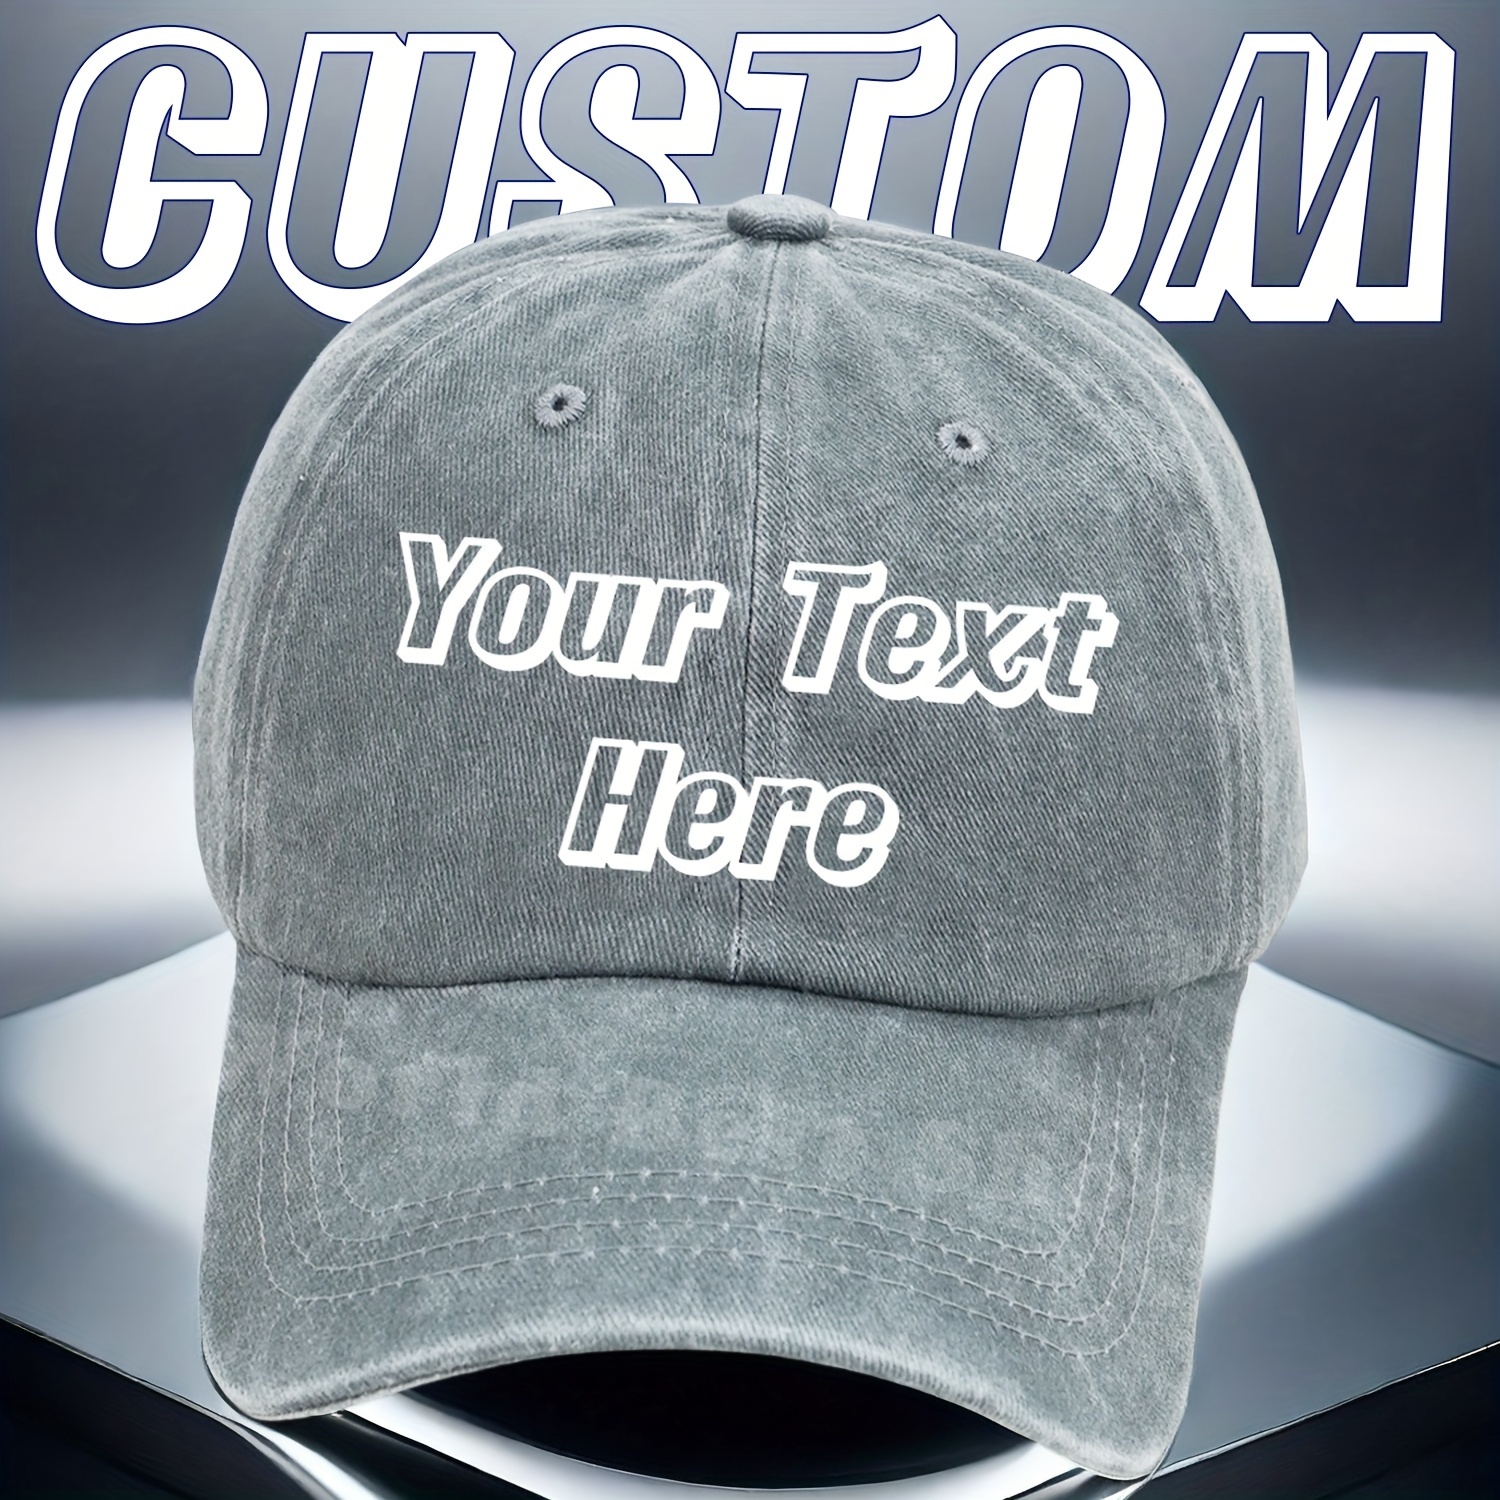 

Customizable Embroidered Text Distressed Washed Cotton Baseball Cap | Casual Unisex Snapback Hat For Sun Protection And Versatile Style